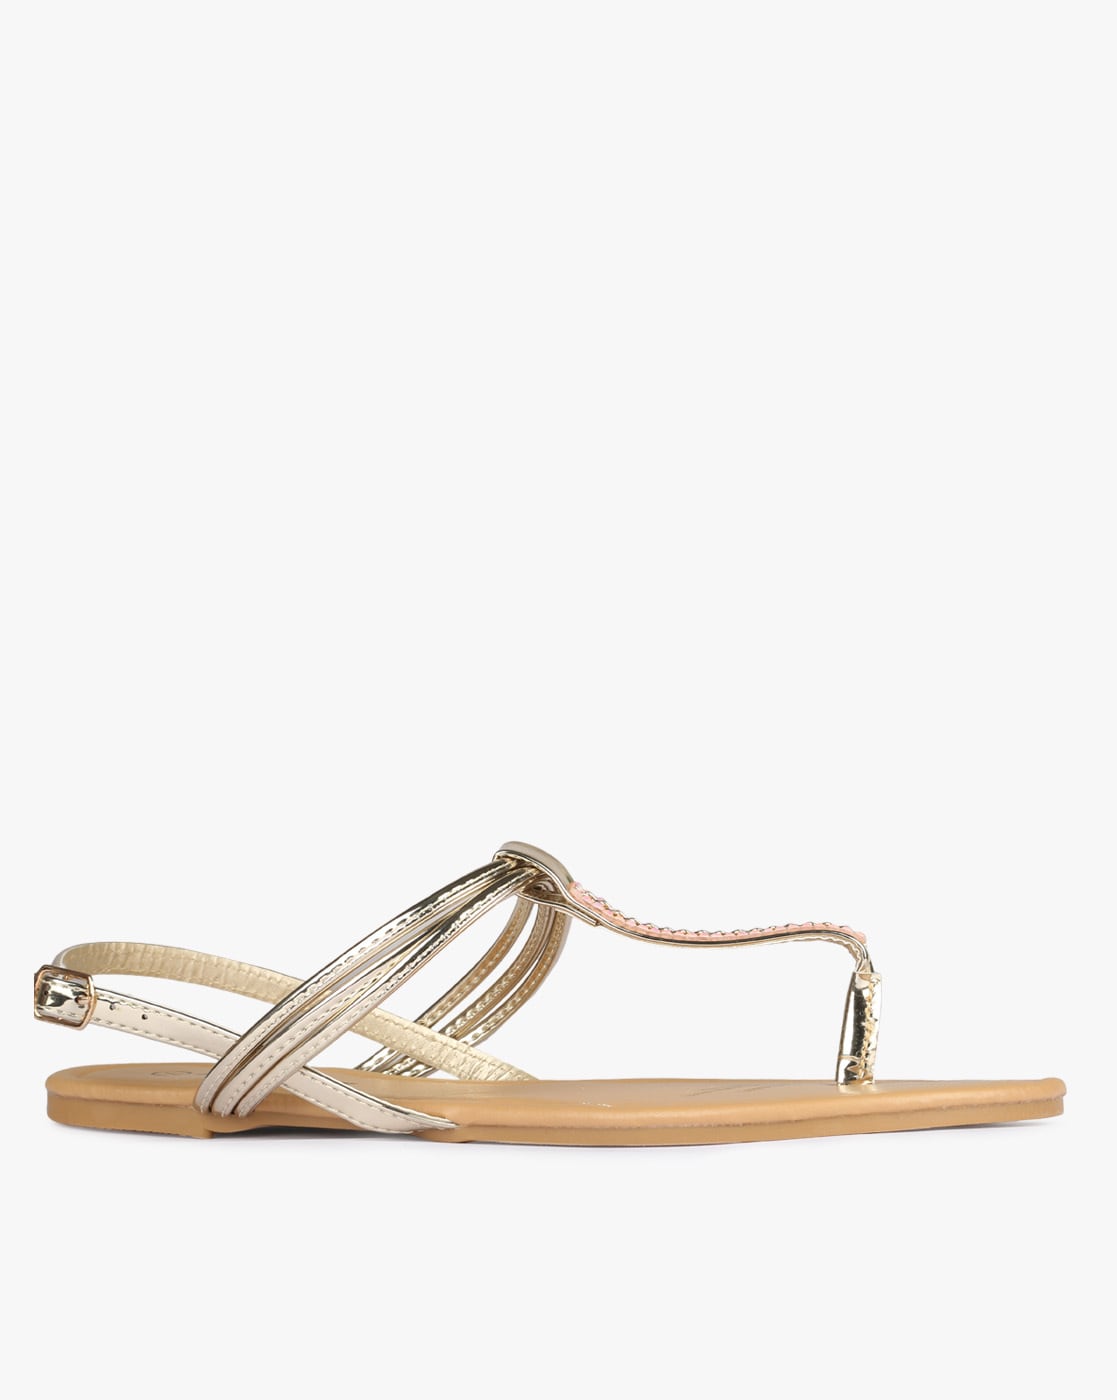 Buy Gold Flat Sandals for Women by HI 